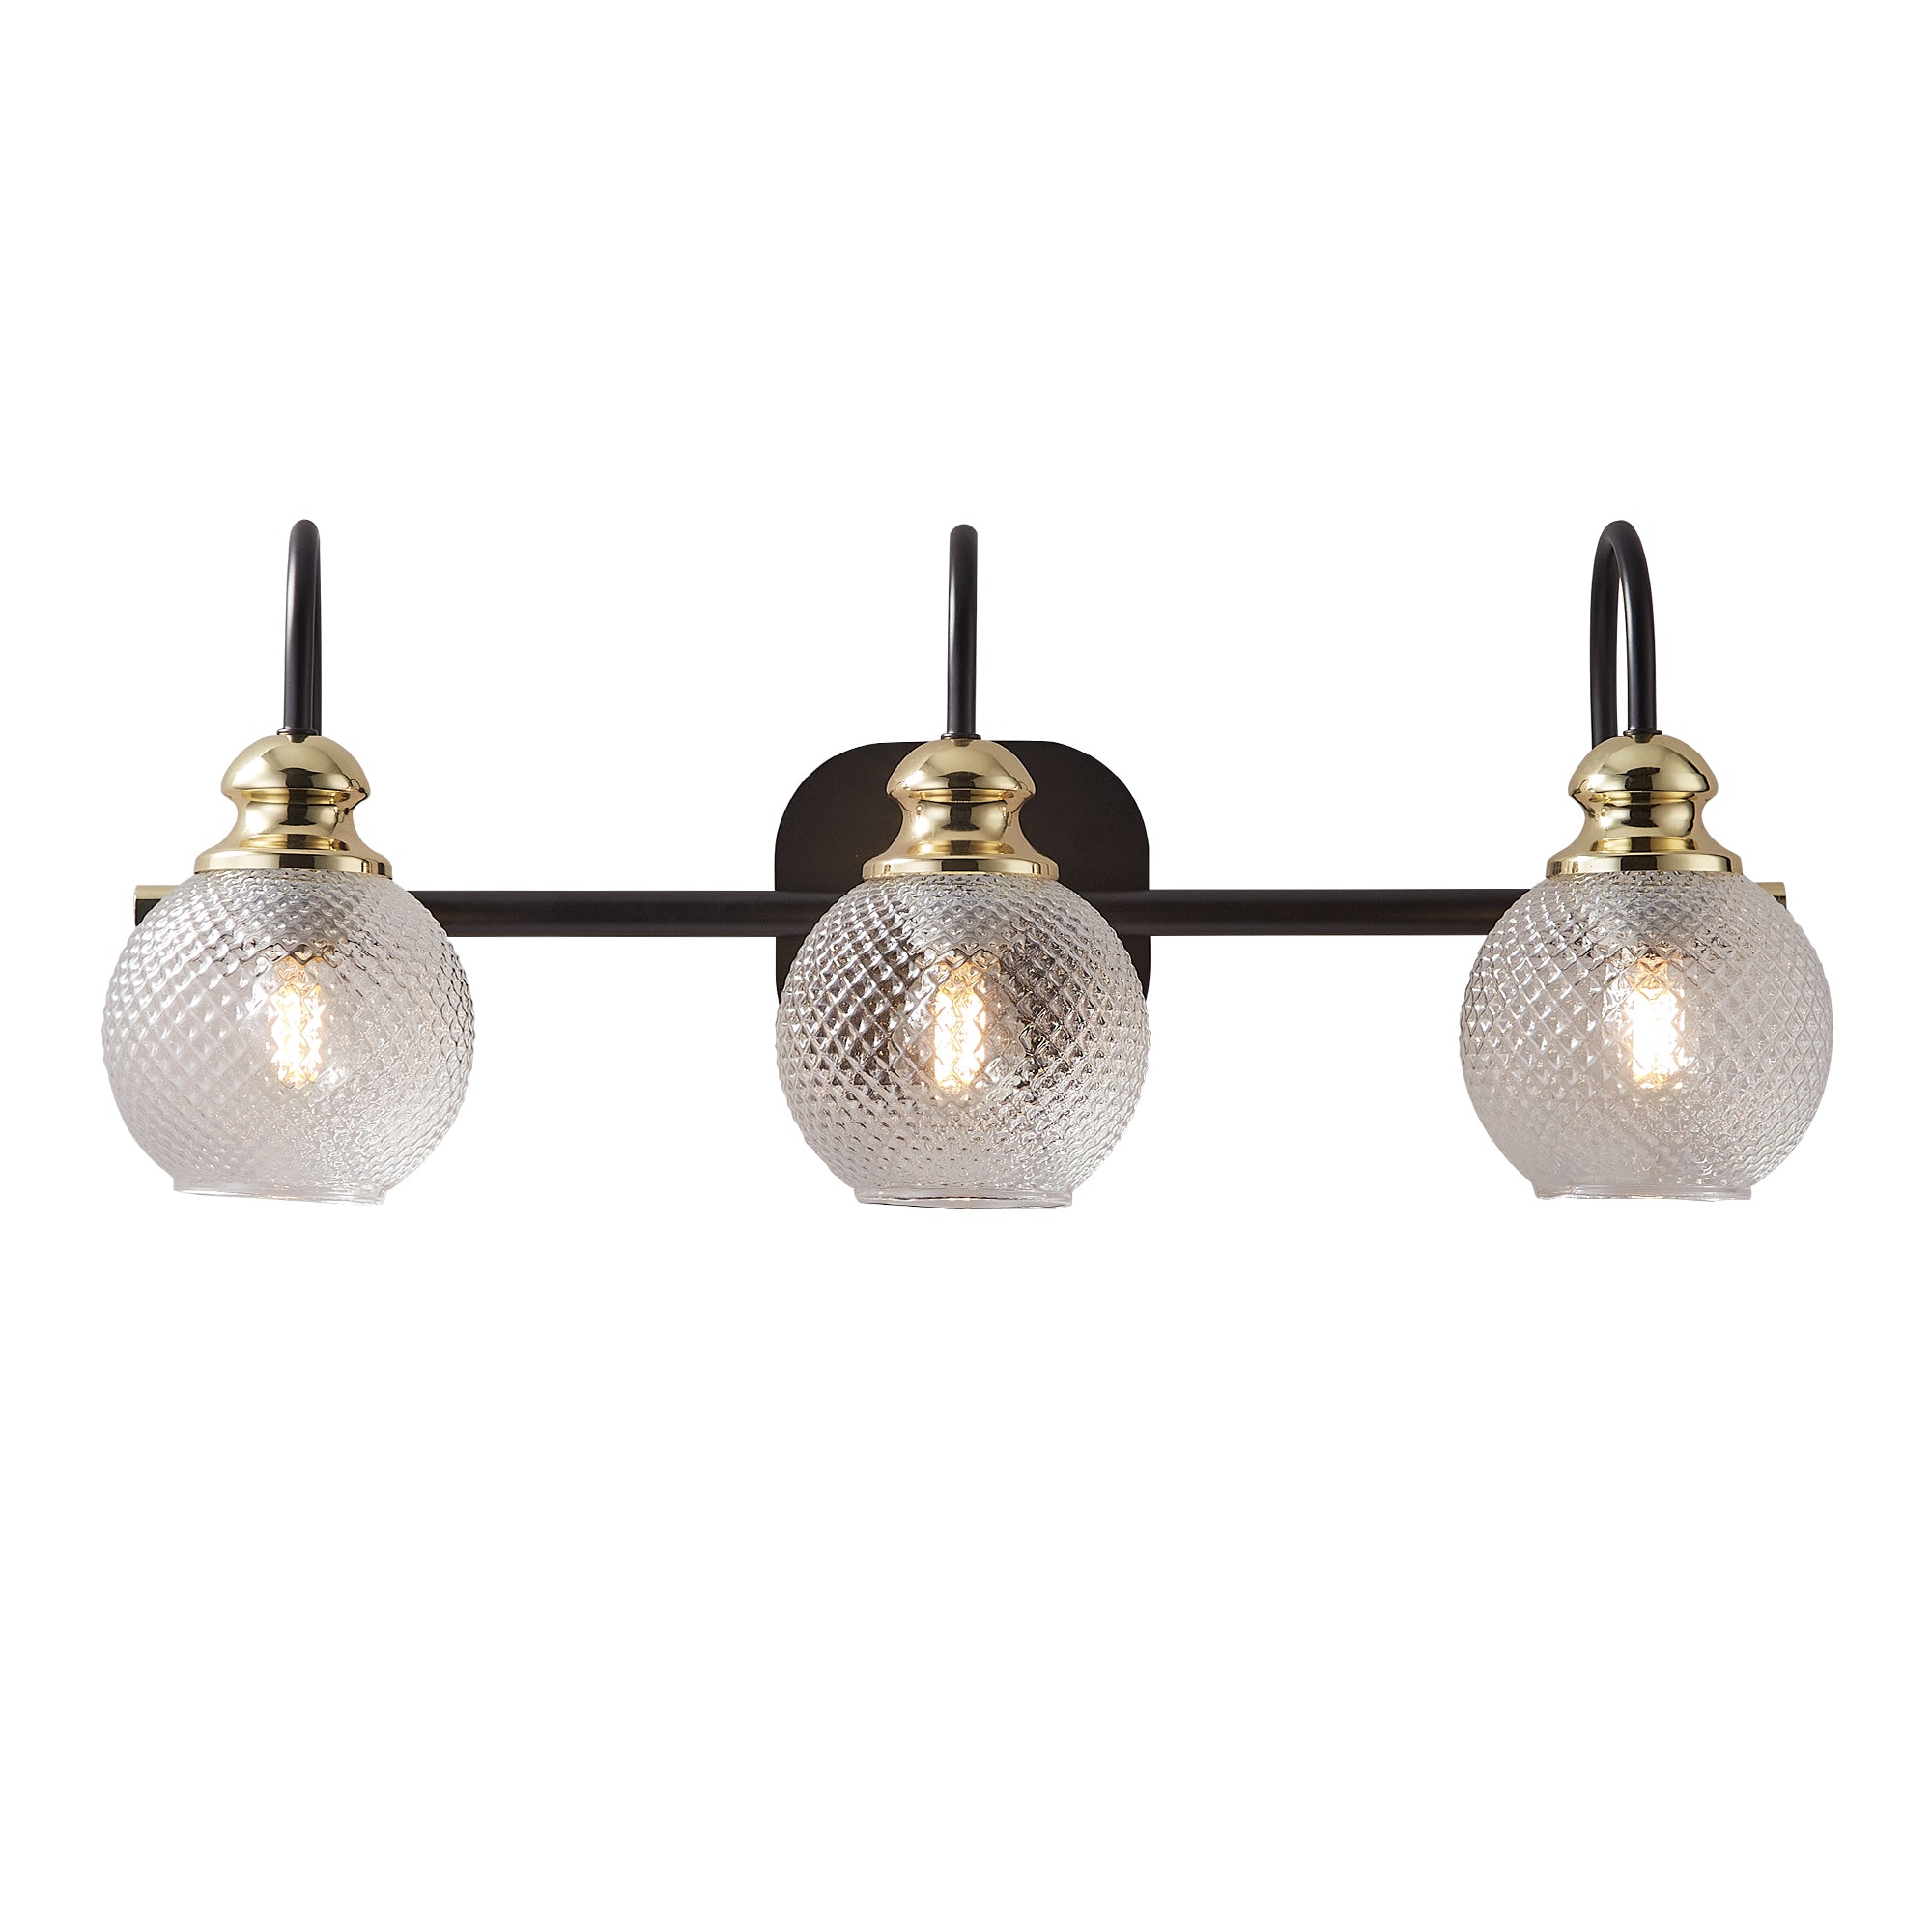 3 Light Modern Bathroom Vanity Light Fixture, Wall Sconces with Clear Glass Shades-Boyel Living